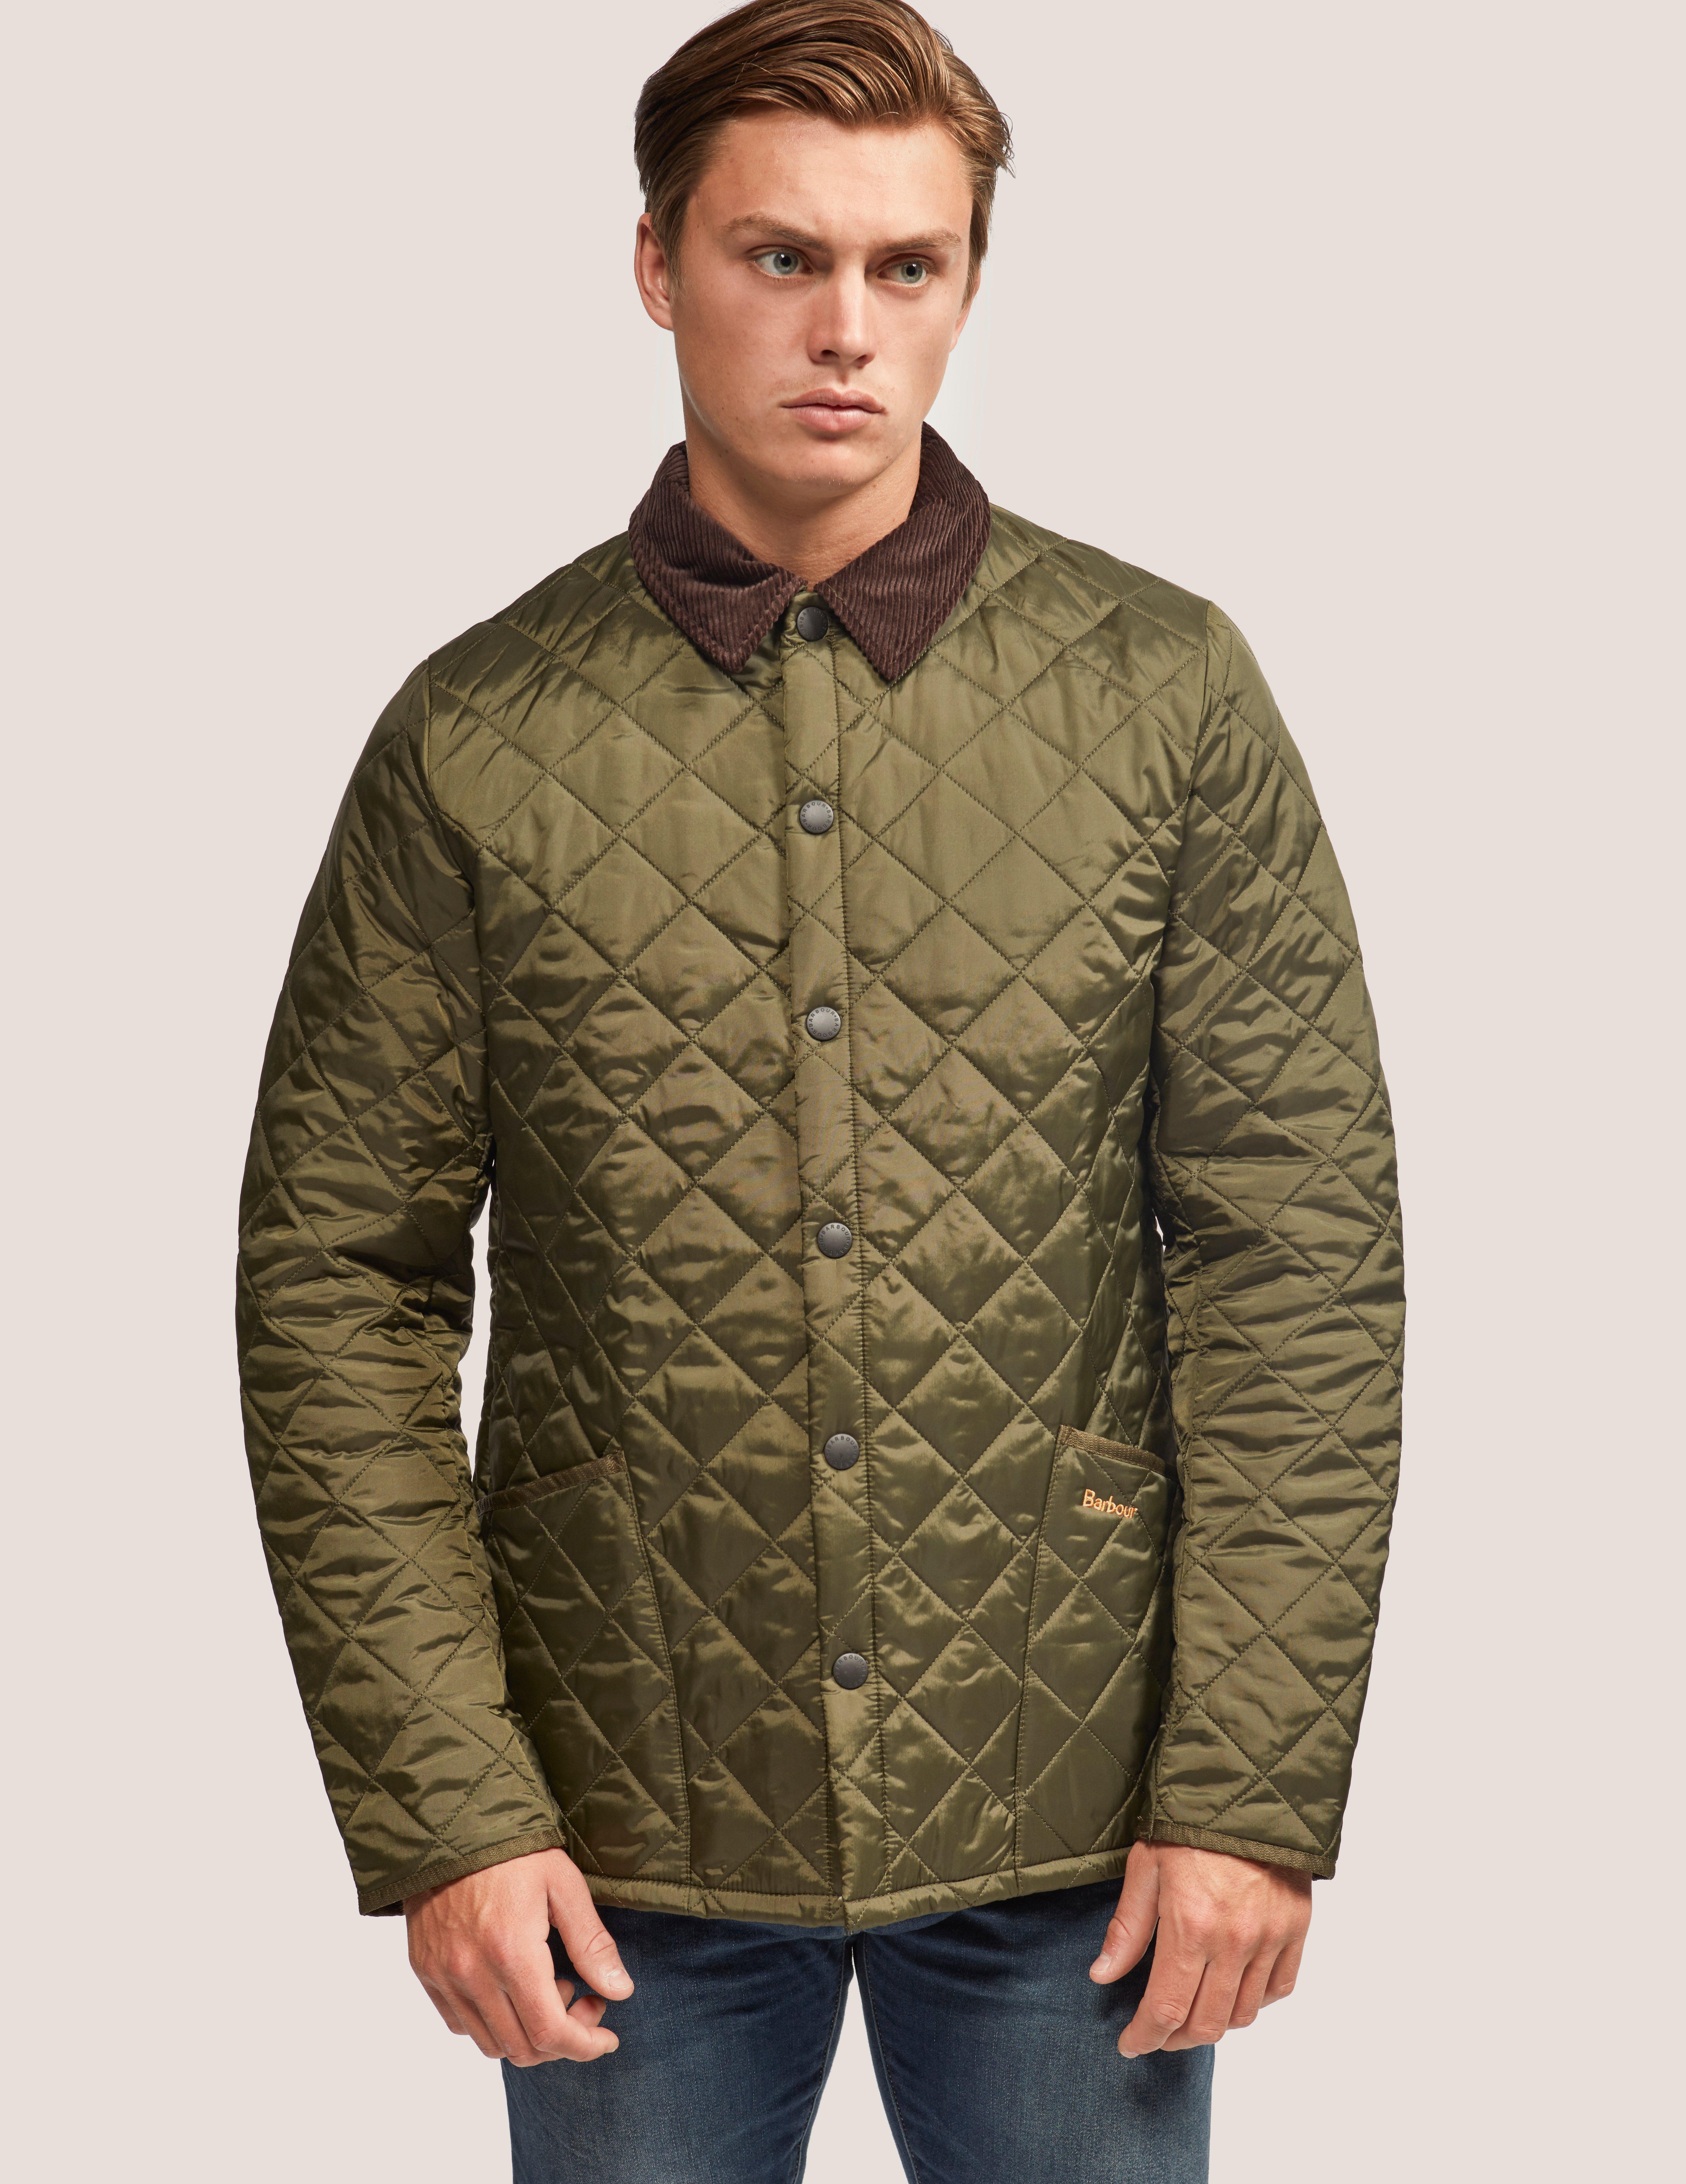 Barbour Heritage Liddesdale Olive Quilted Jacket in Green for Men - Lyst